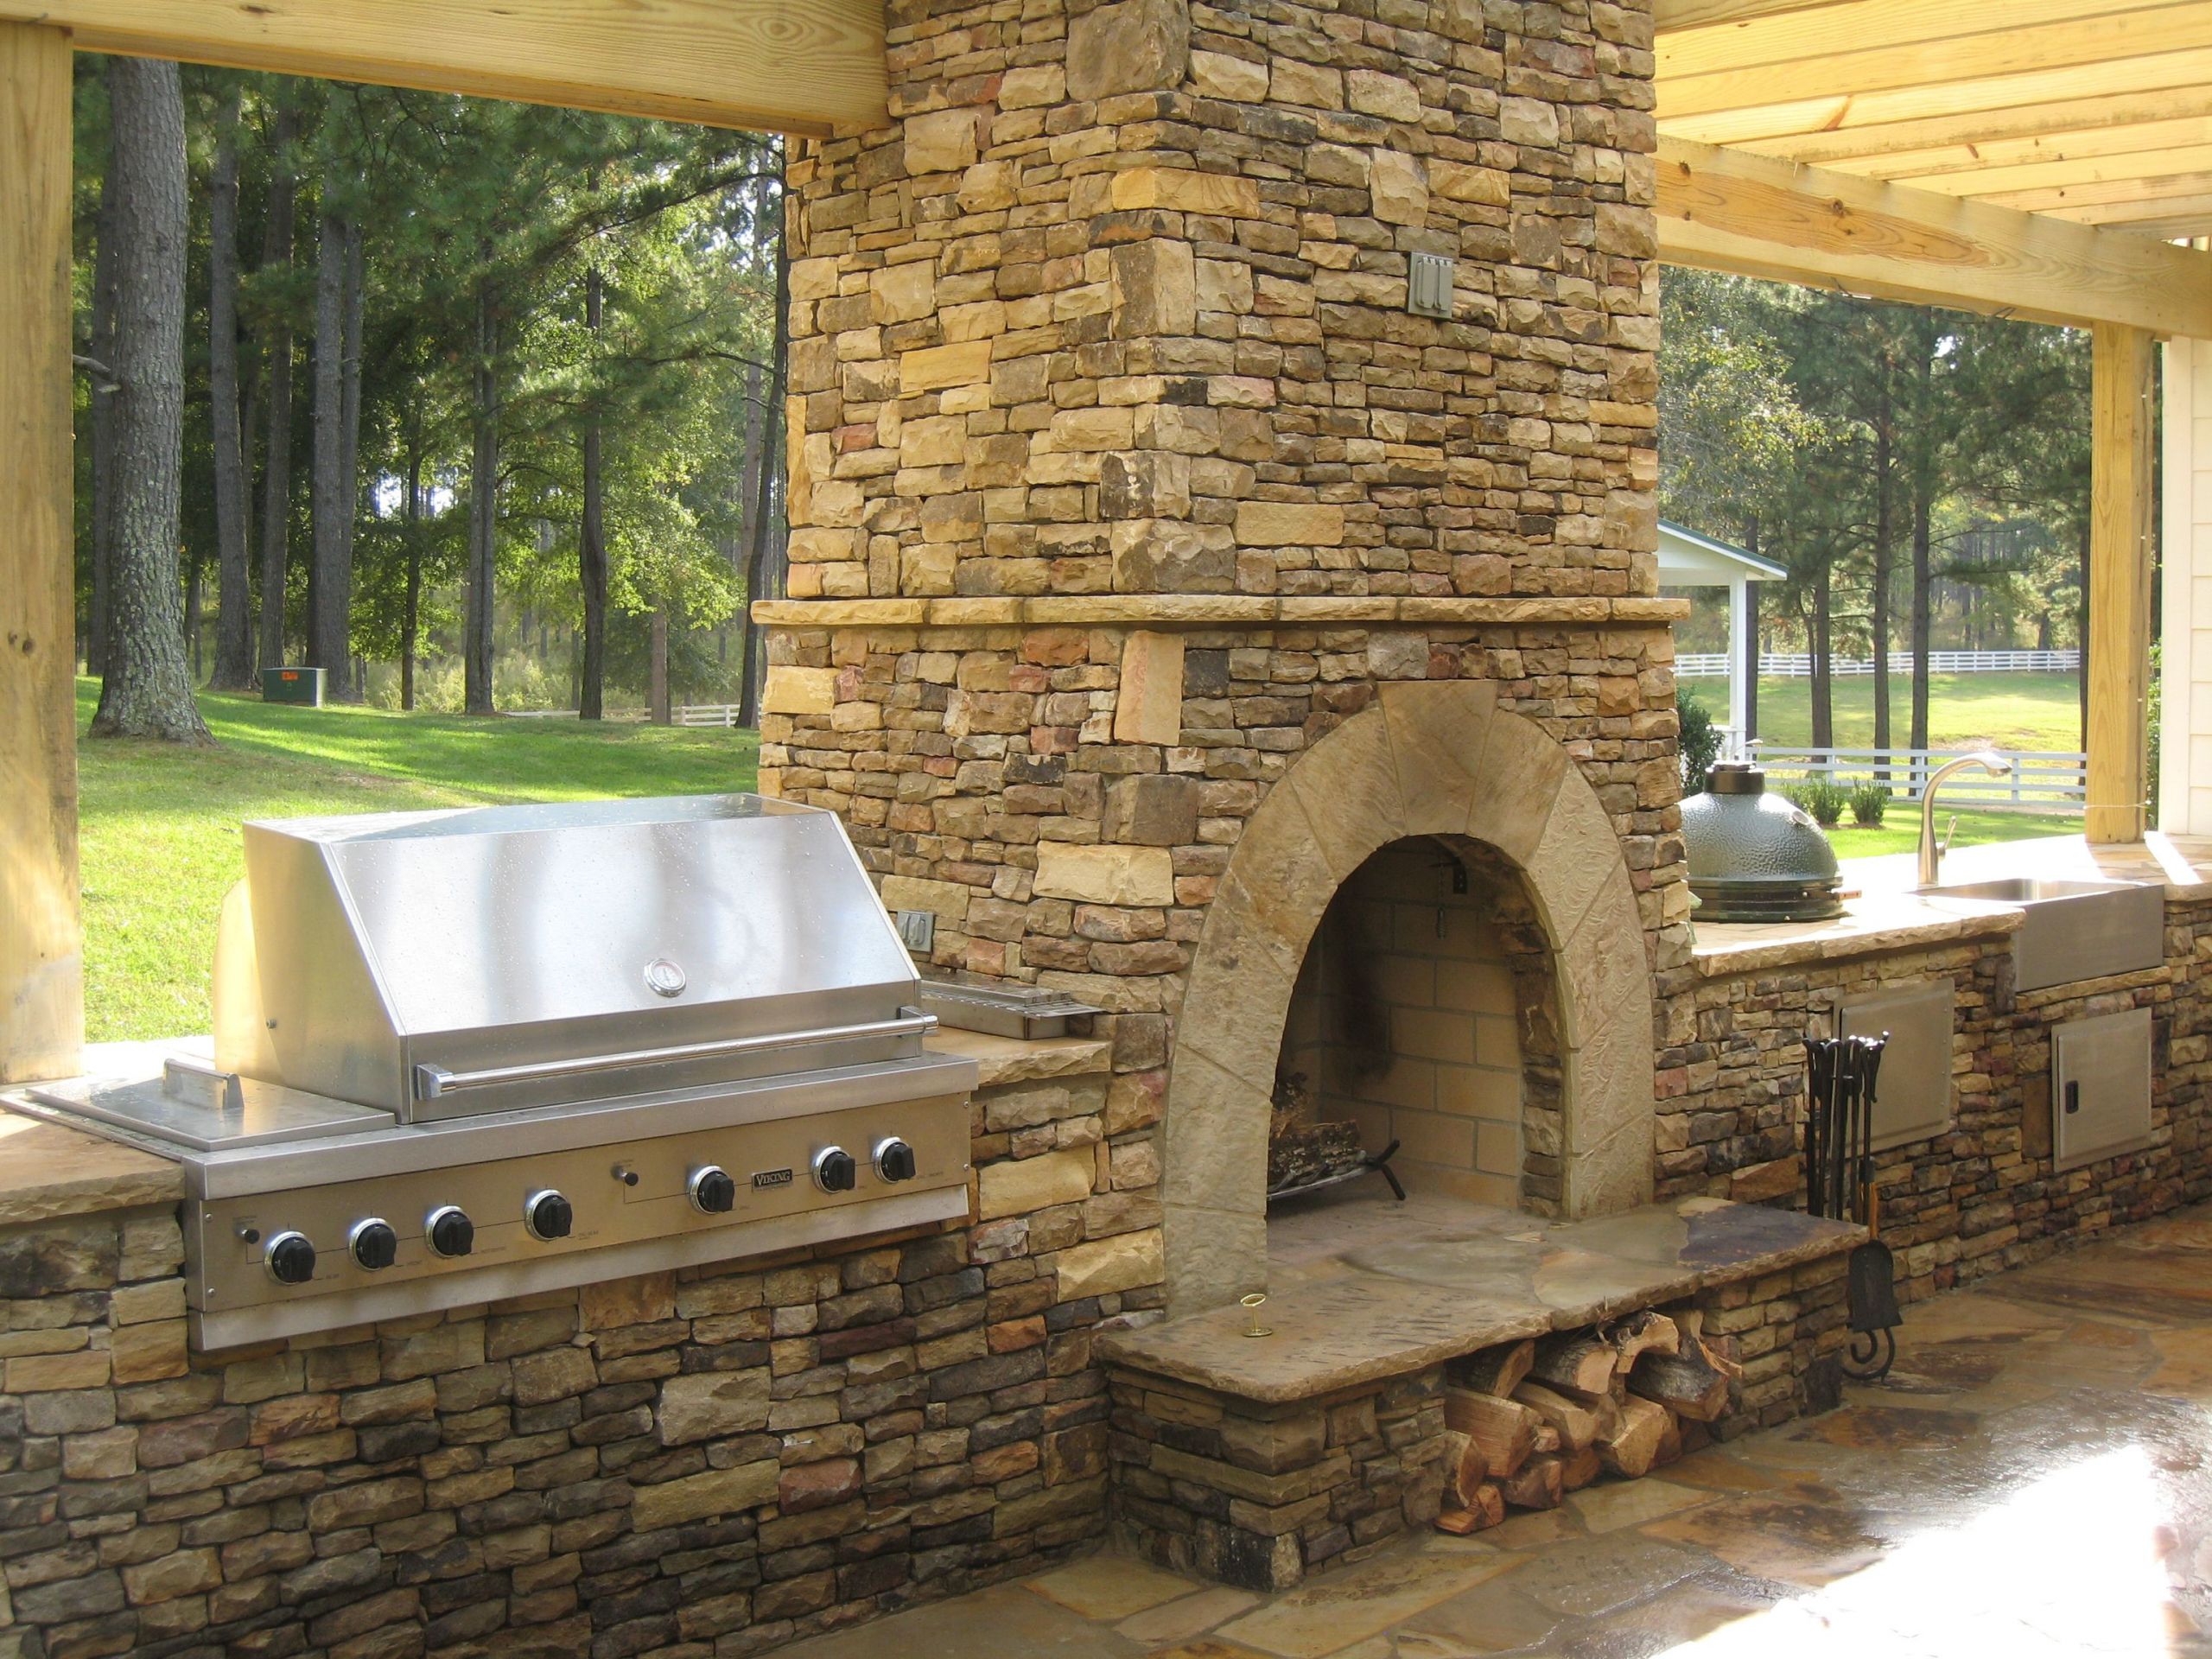 Nyc Fireplaces &amp; Outdoor Kitchens
 For upper patio Grill on one side and counter with water